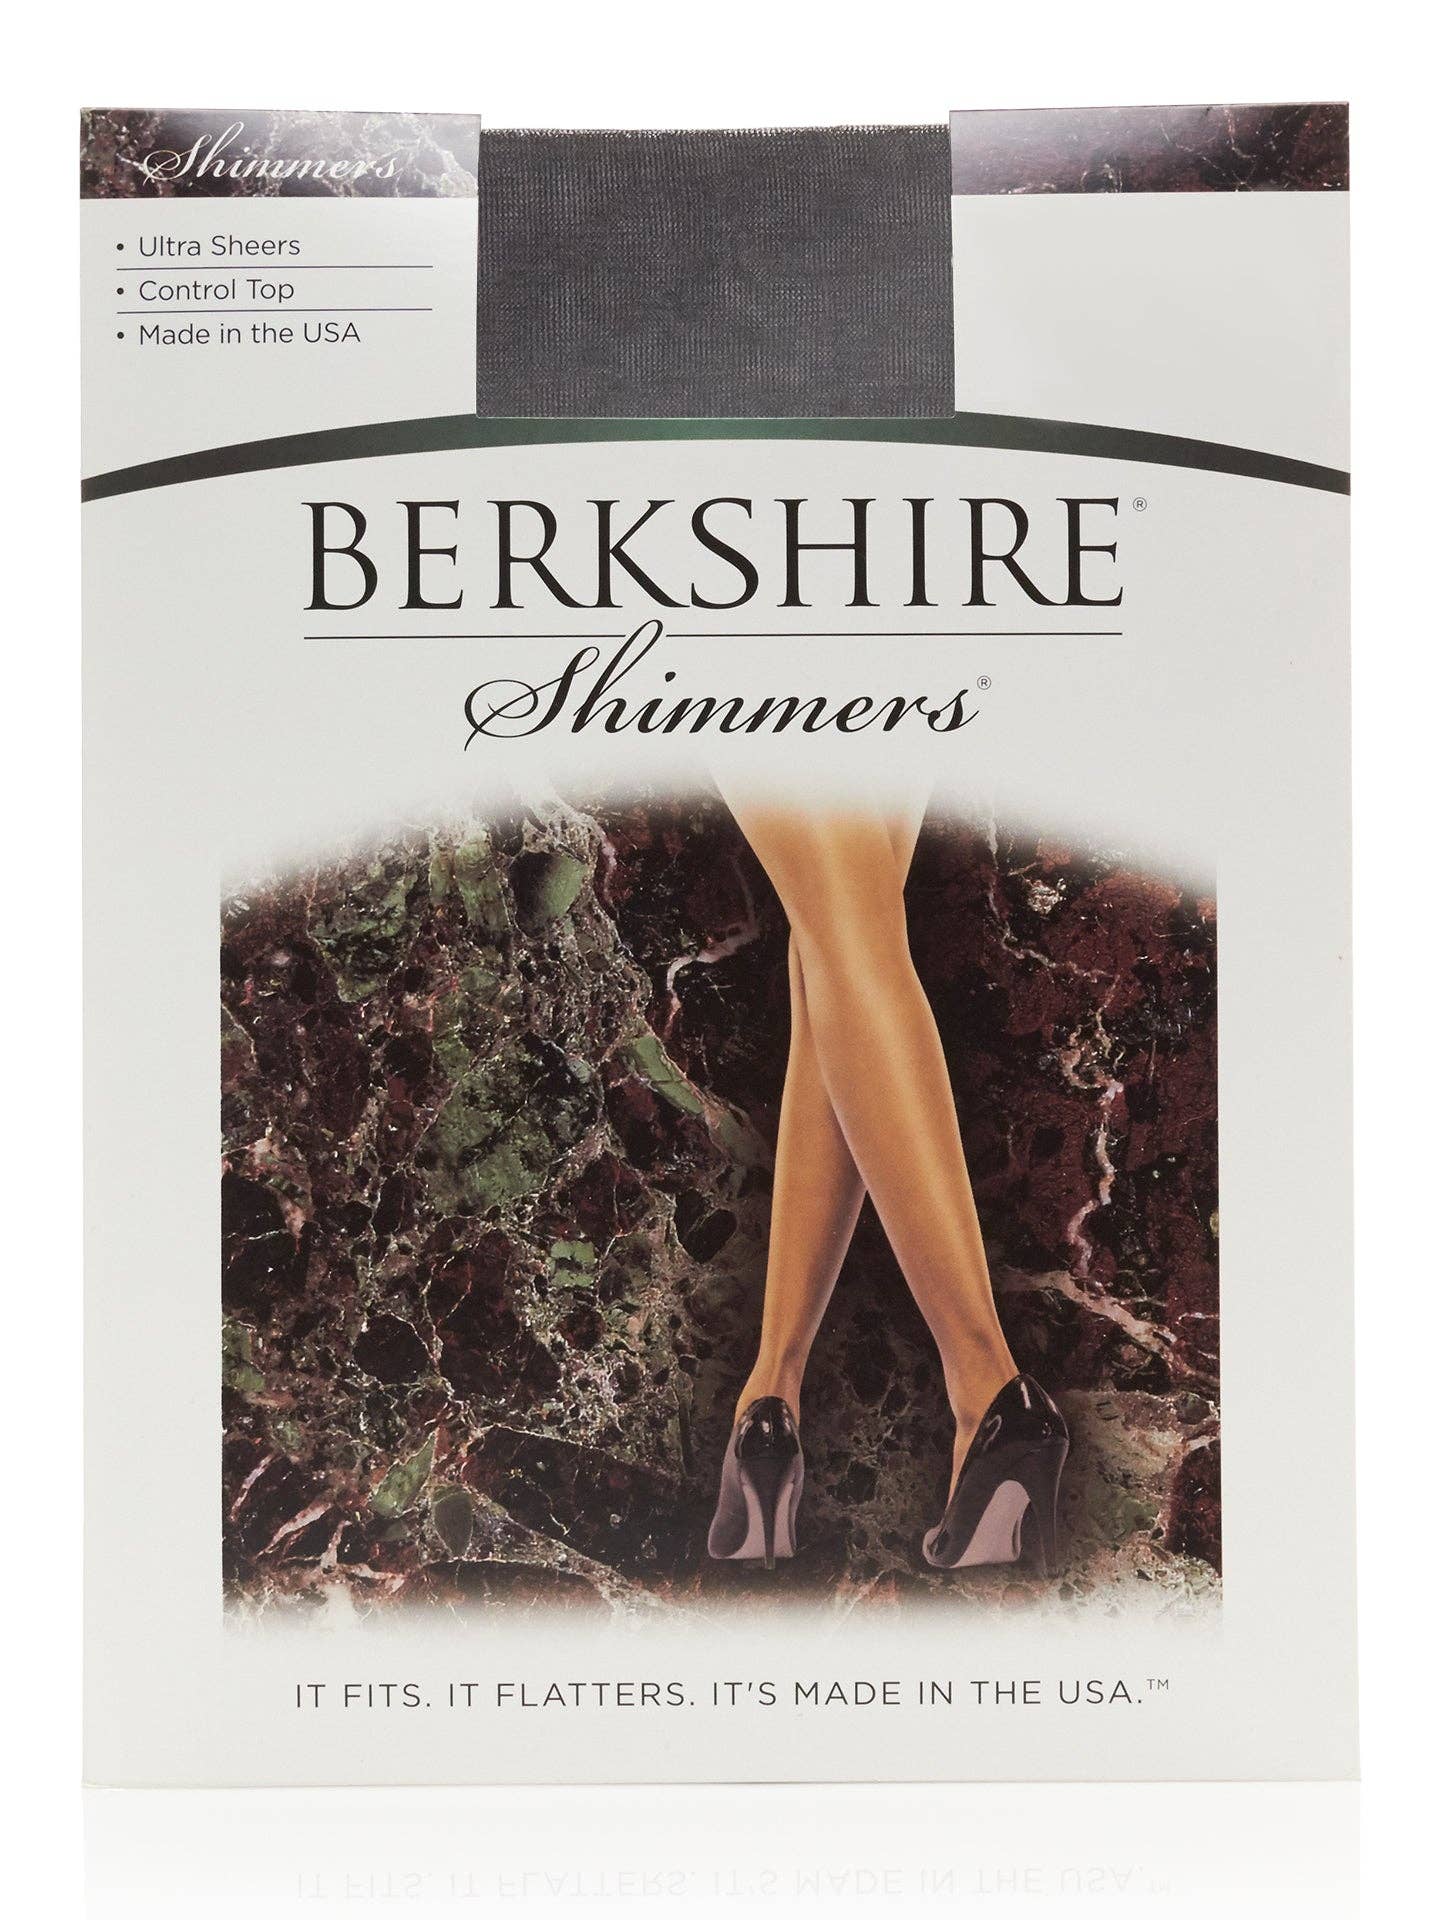 Shimmers Ultra Sheer Control Top Pantyhose - Black / 2